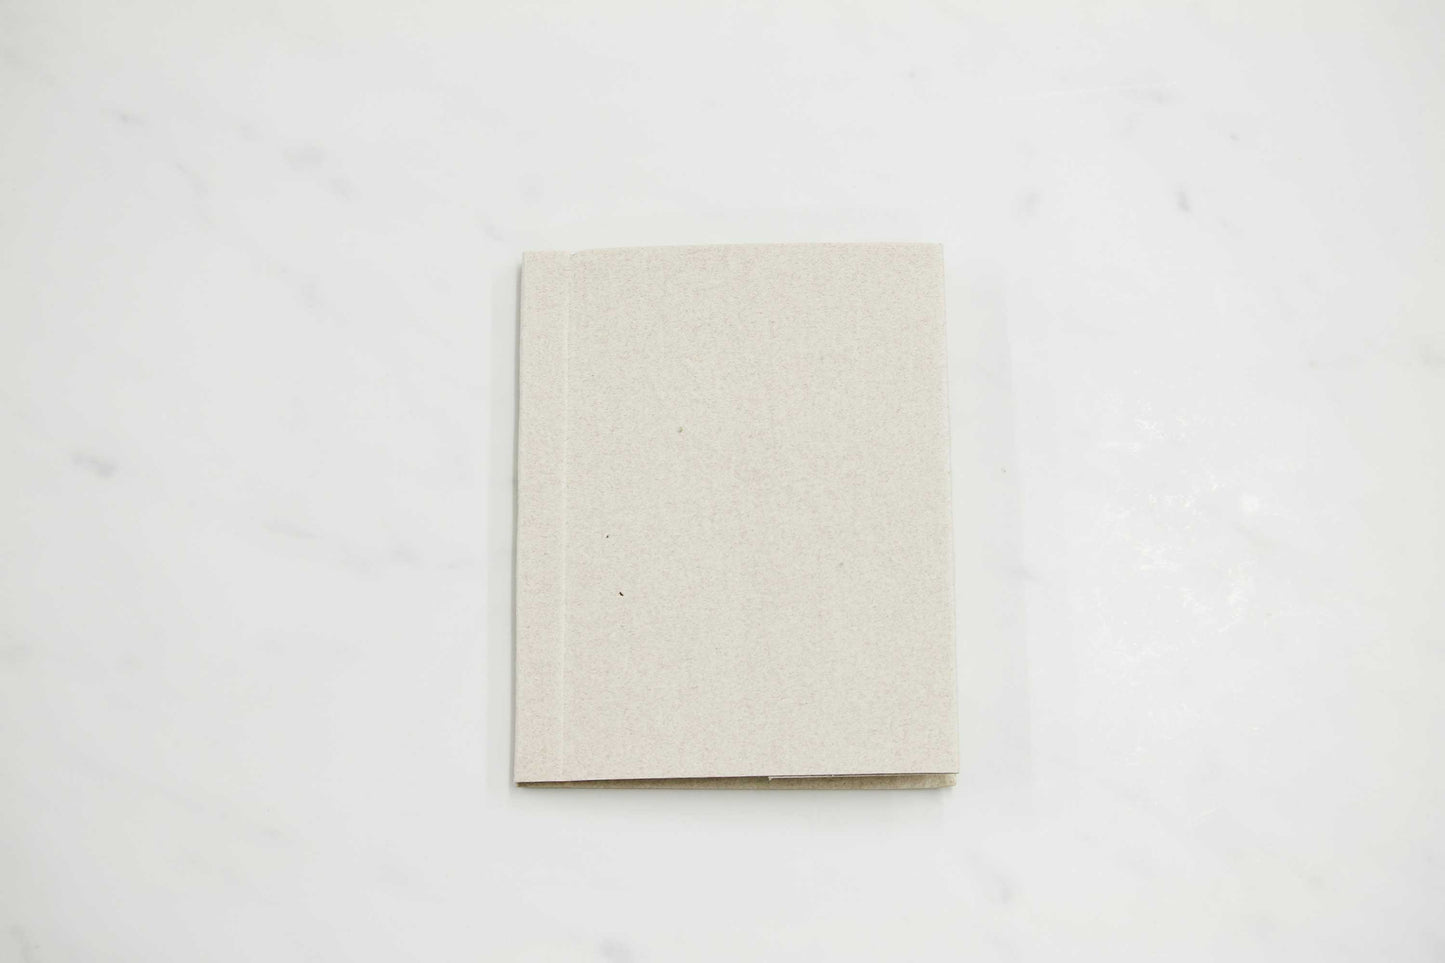 Mini 5 1/4-inch by 4 1/4-inch handmade Papeterie St. Armand cotton paper notepad with beige cover